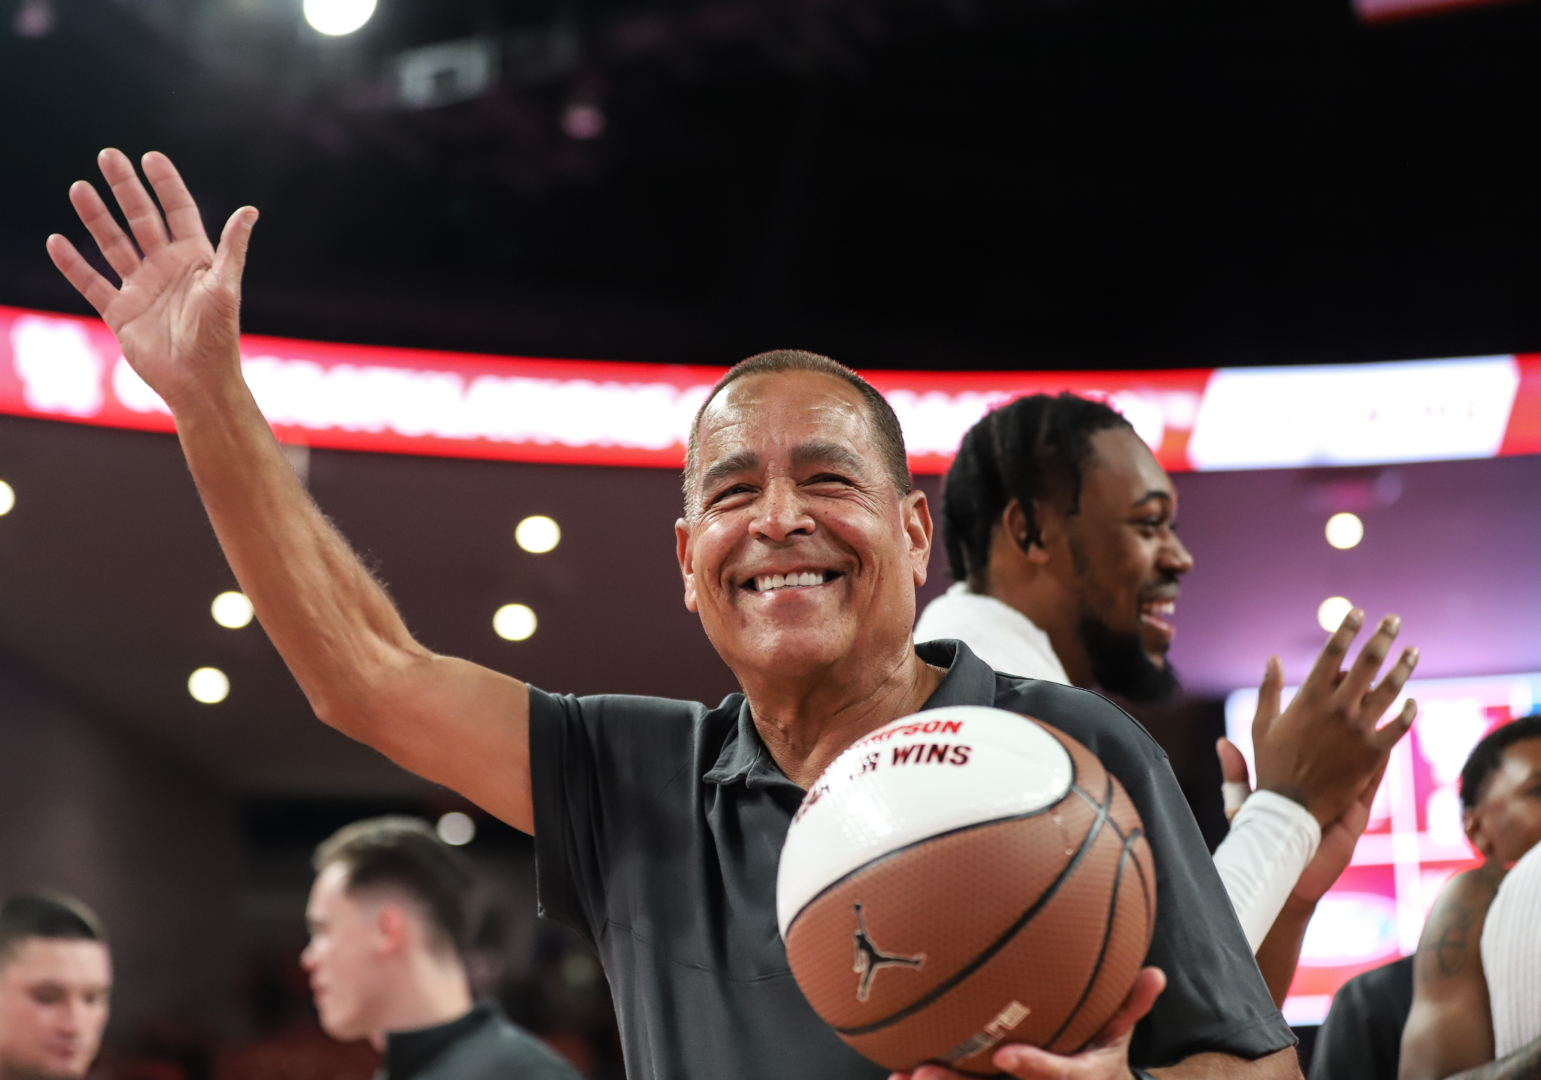 Kelvin Sampson reached win No. 700 with UH's season-opening victory over Northern Colorado on Monday night at Fertitta Center. | Sean Thomas/The Cougar